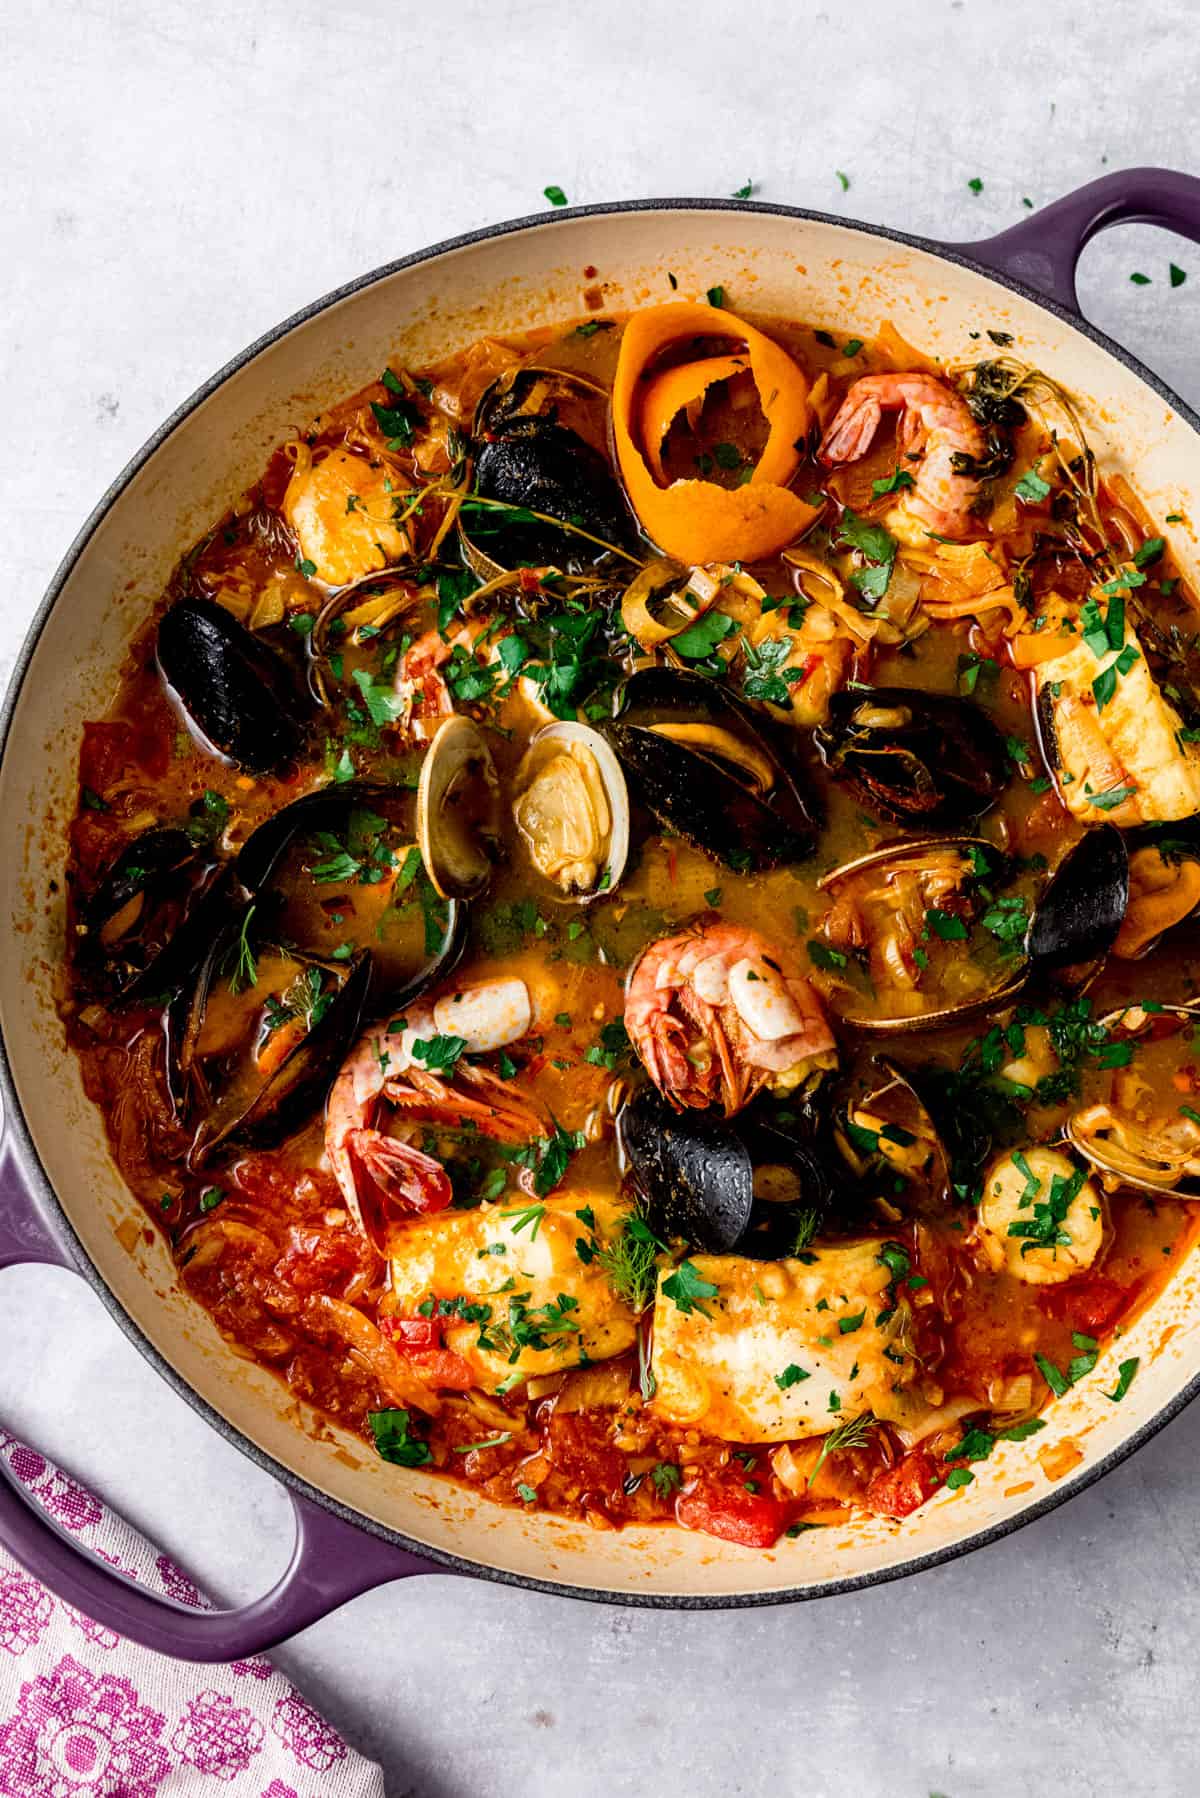 French seafood stew with tomatoes, fennel and saffron.